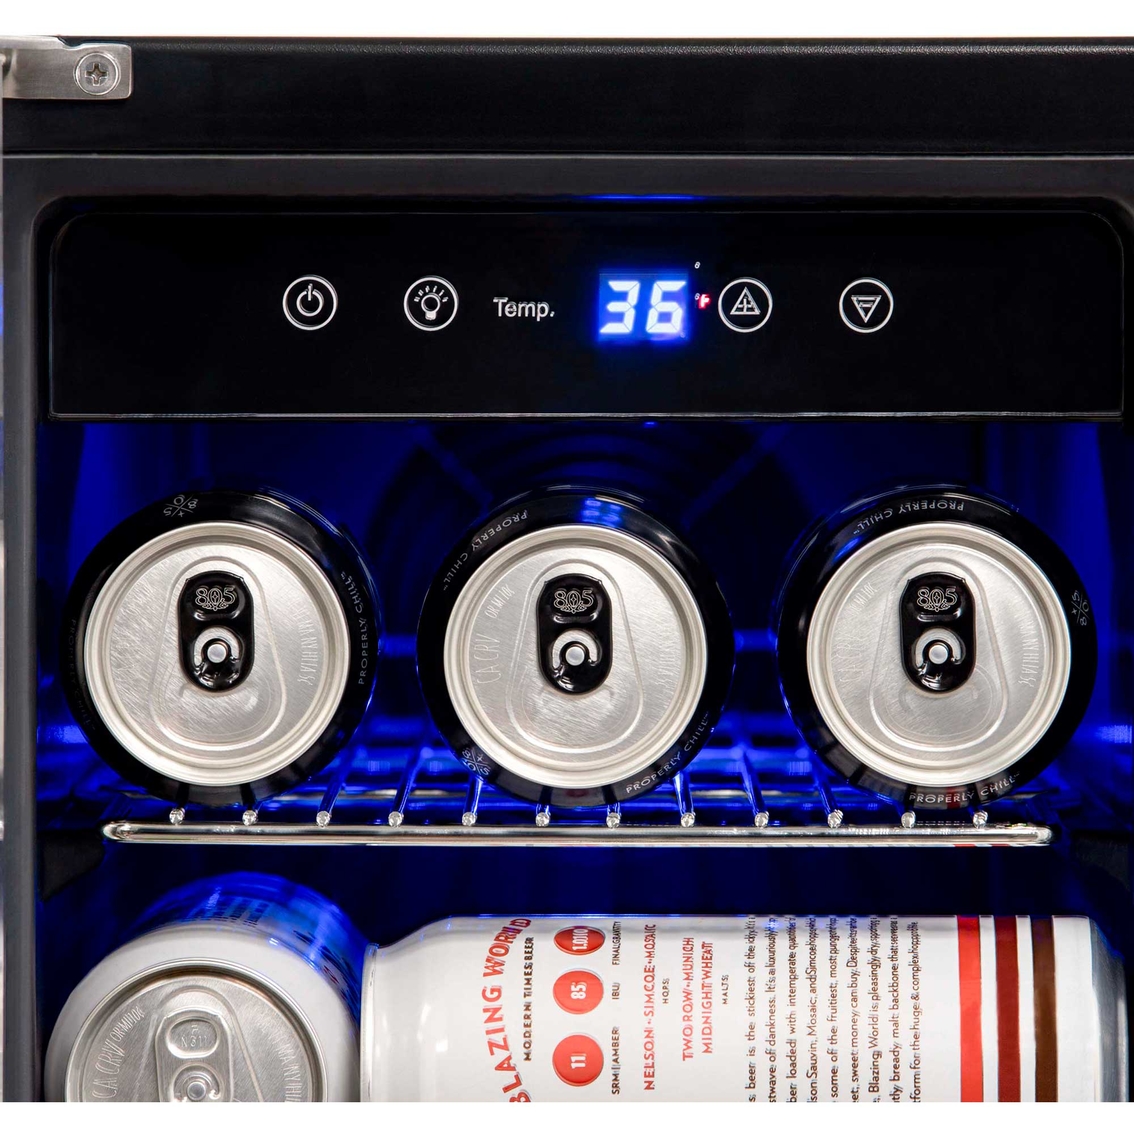 NewAir 24 in. Built-in Dual Zone 18 Bottle and 58 Can Wine and Beverage Cooler - Image 6 of 10